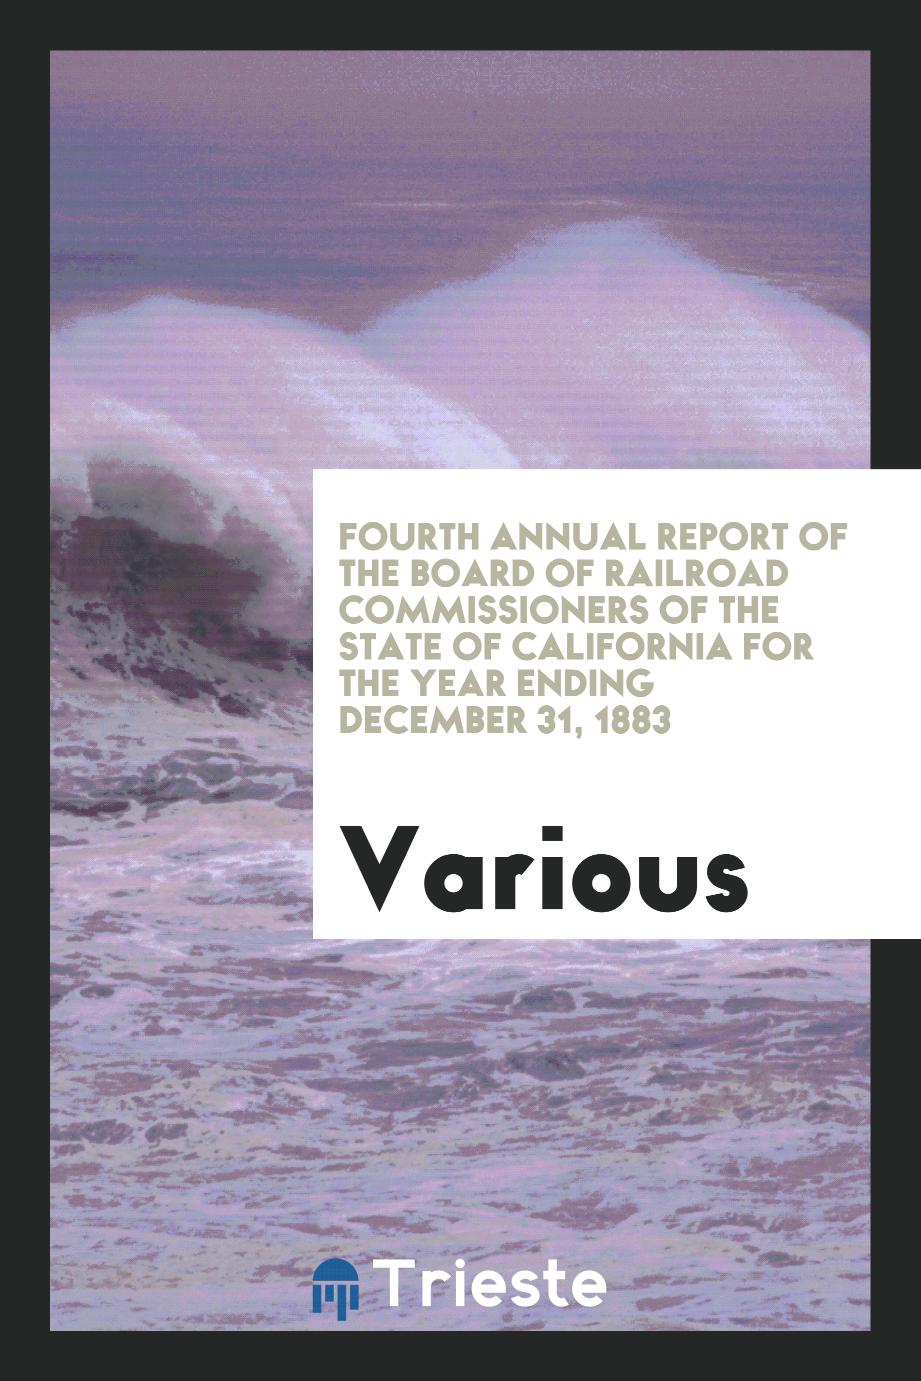 Fourth Annual Report of the Board of Railroad Commissioners of the State of California for the Year Ending December 31, 1883